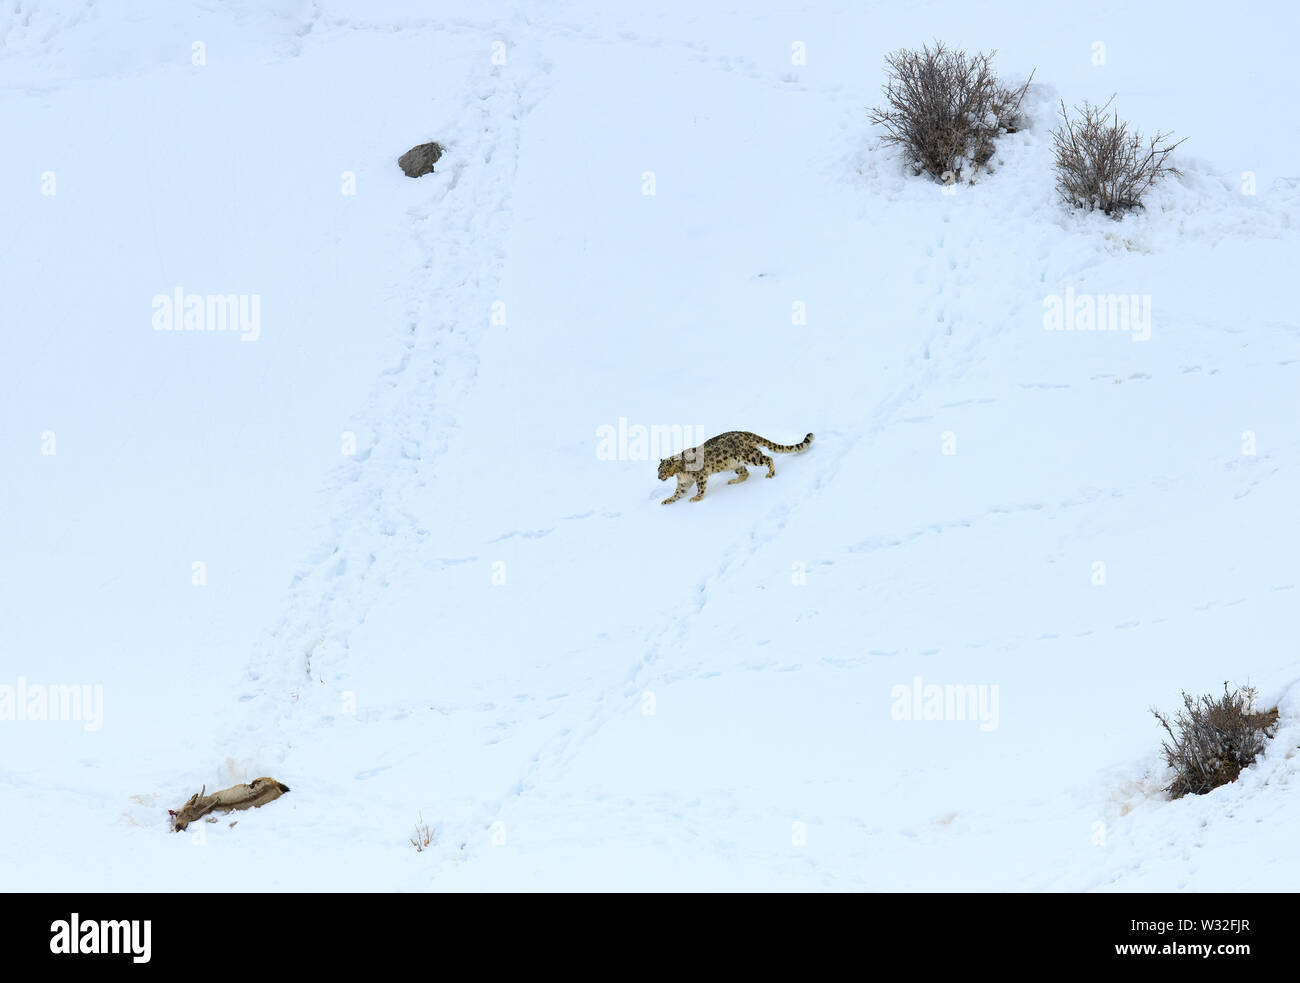 Gray ghost of Himalayas (Snow Leopard), killing and eating an Ibex, Highly camoflaged hiding animal in mountains, in extreme climatic condition Stock Photo